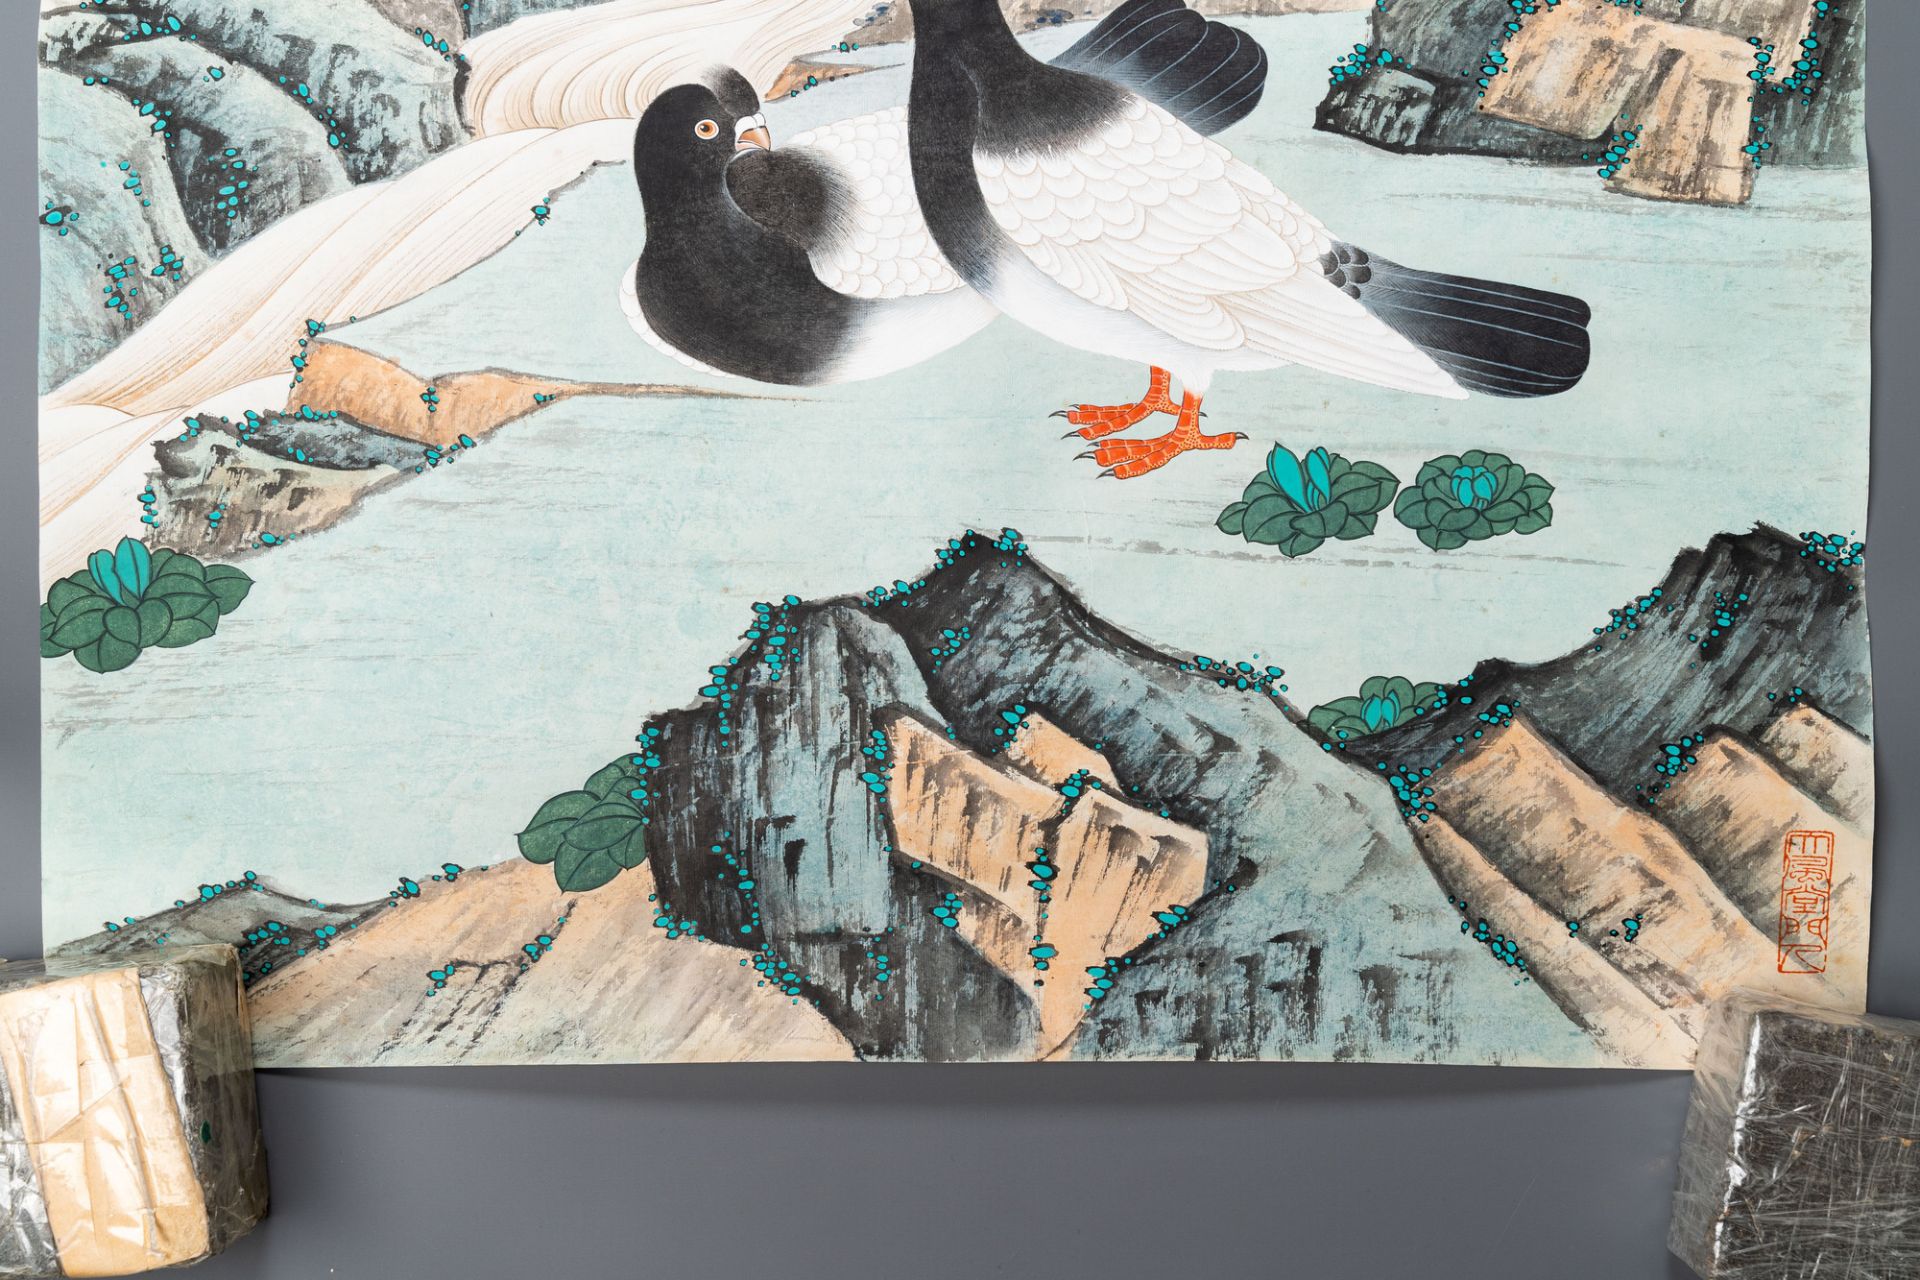 Sun Yunsheng (1918-2000): ÔPeace dovesÕ, ink and colour on paper - Image 9 of 21